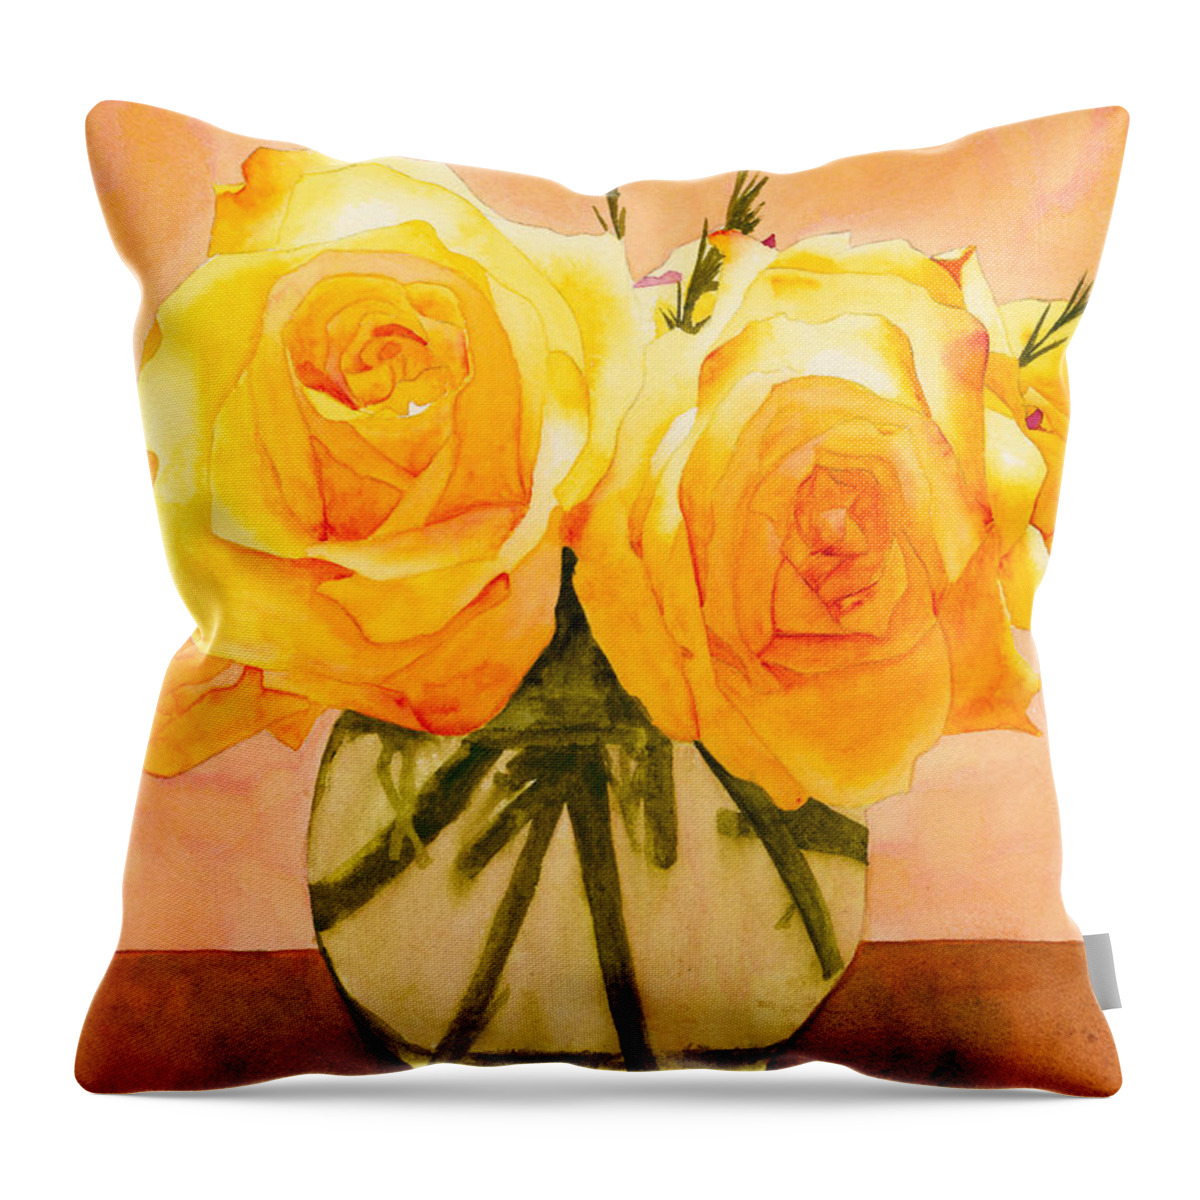 Rose Throw Pillow featuring the painting Valentine Surprise by Ken Powers